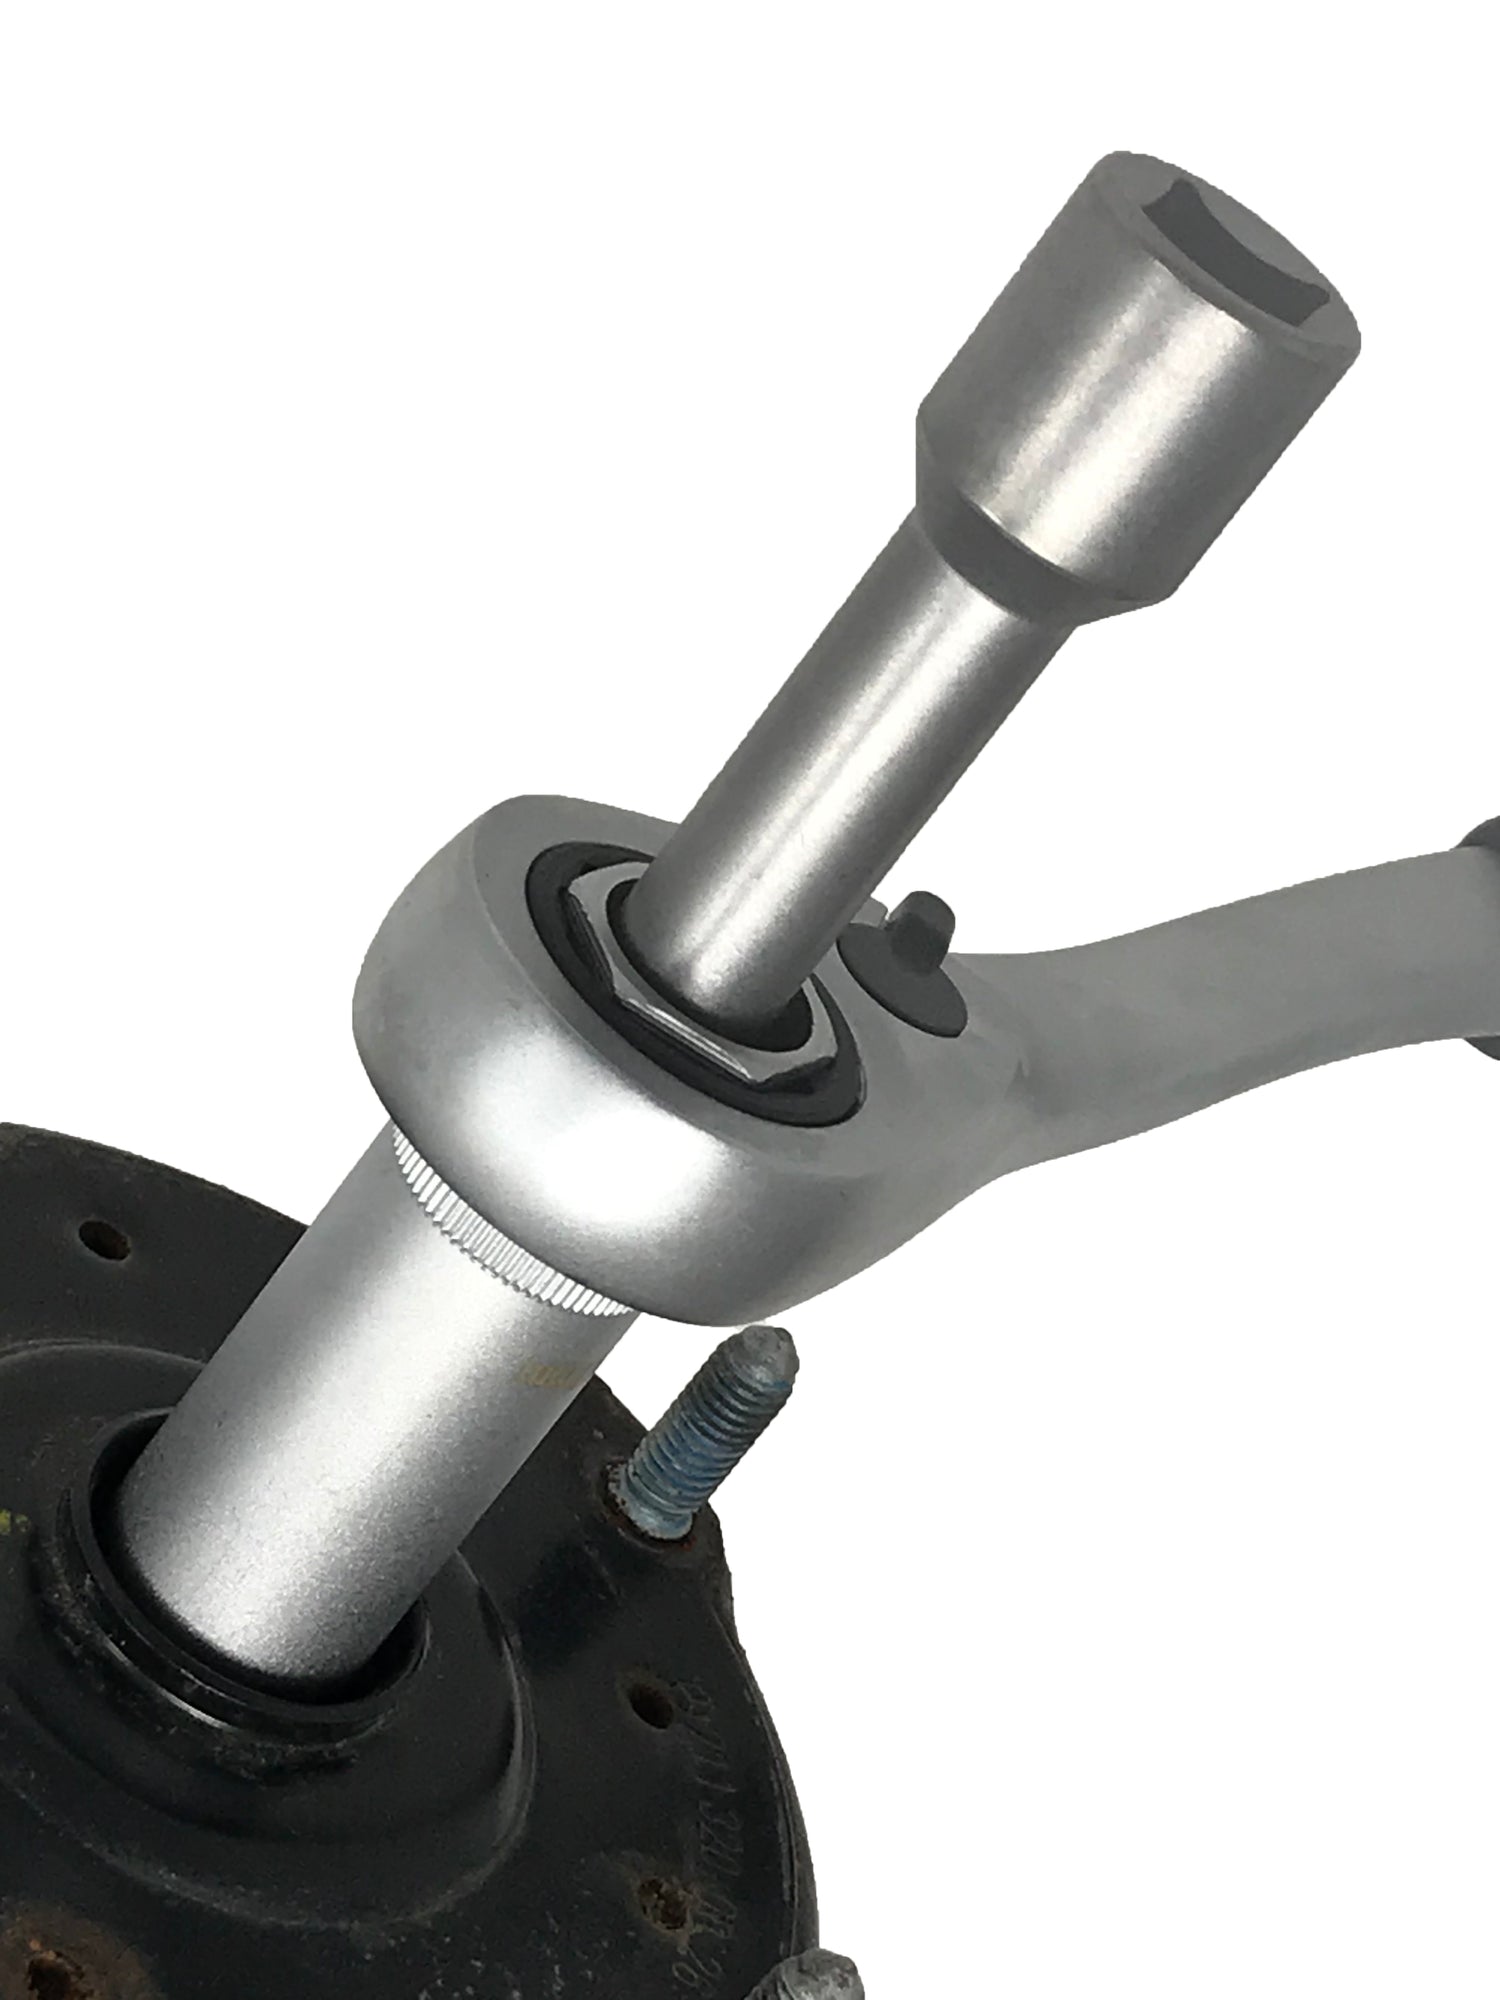 Tightens top mount nut with proper torque while holding the strut